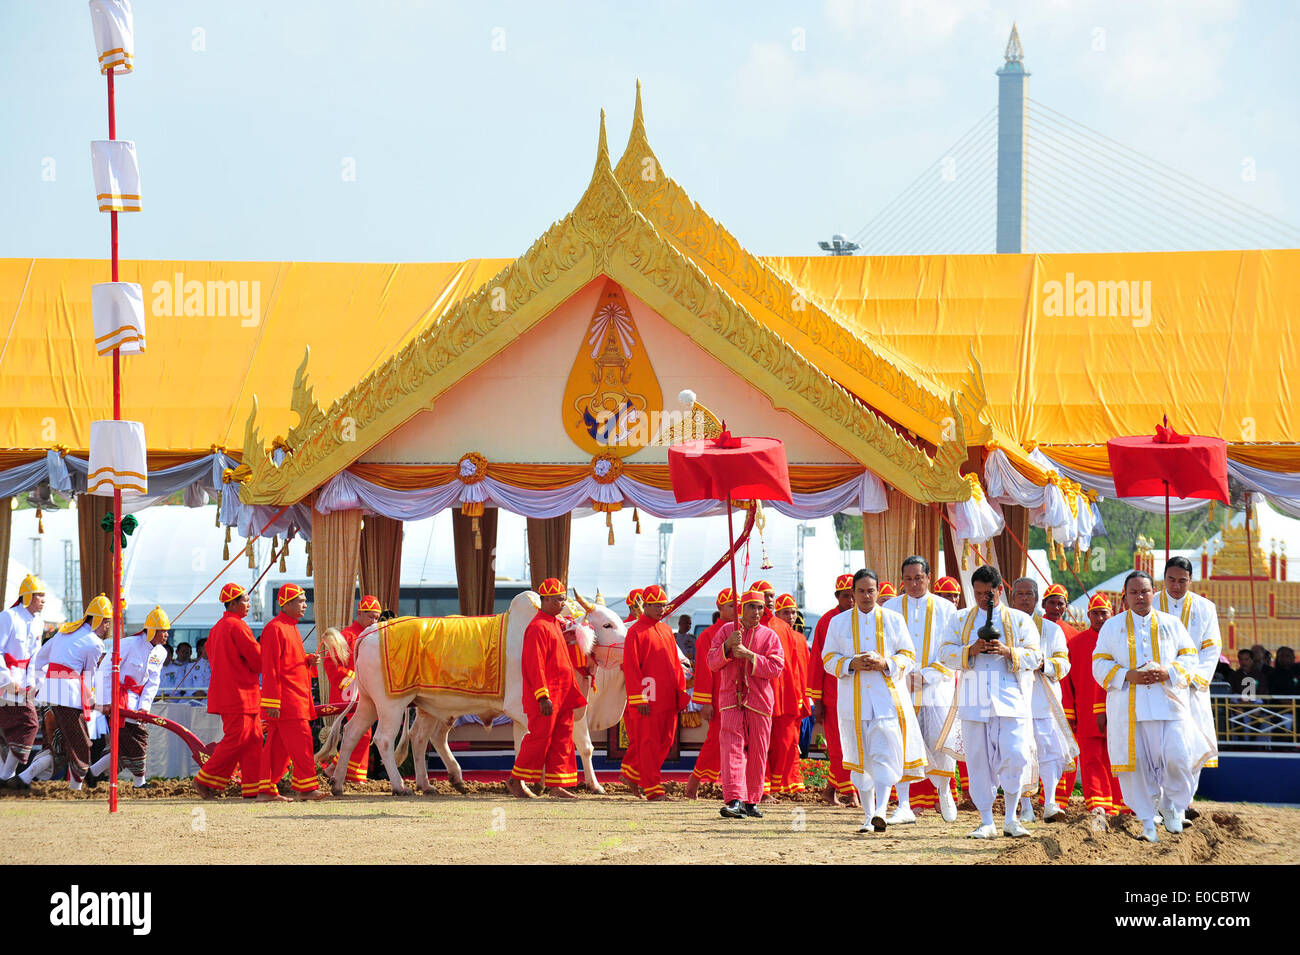 Bangkok, Thailand. 9th May, 2014. Sacred oxen are guided by royal attendants during the Royal Ploughing ceremony in Bangkok, Thailand, May 9, 2014. The ancient ceremony is held every year in Thailand to mark the traditional beginning of the rice growing season. Credit:  Rachen Sageamsak/Xinhua/Alamy Live News Stock Photo